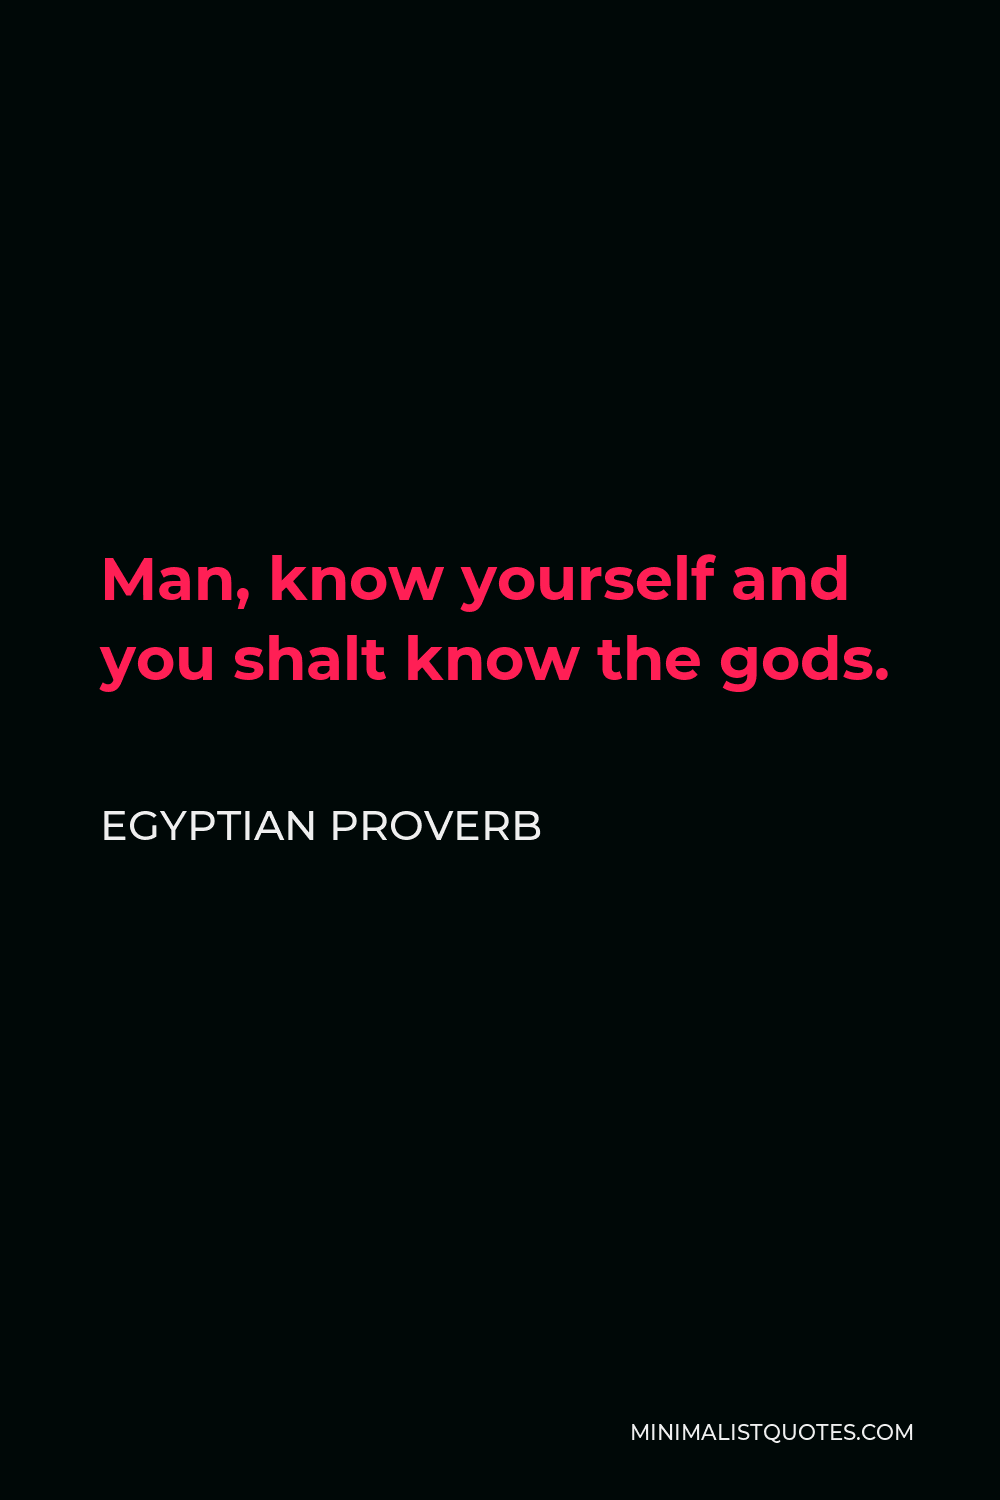 Egyptian Proverb Quote - Man, know yourself and you shalt know the gods.